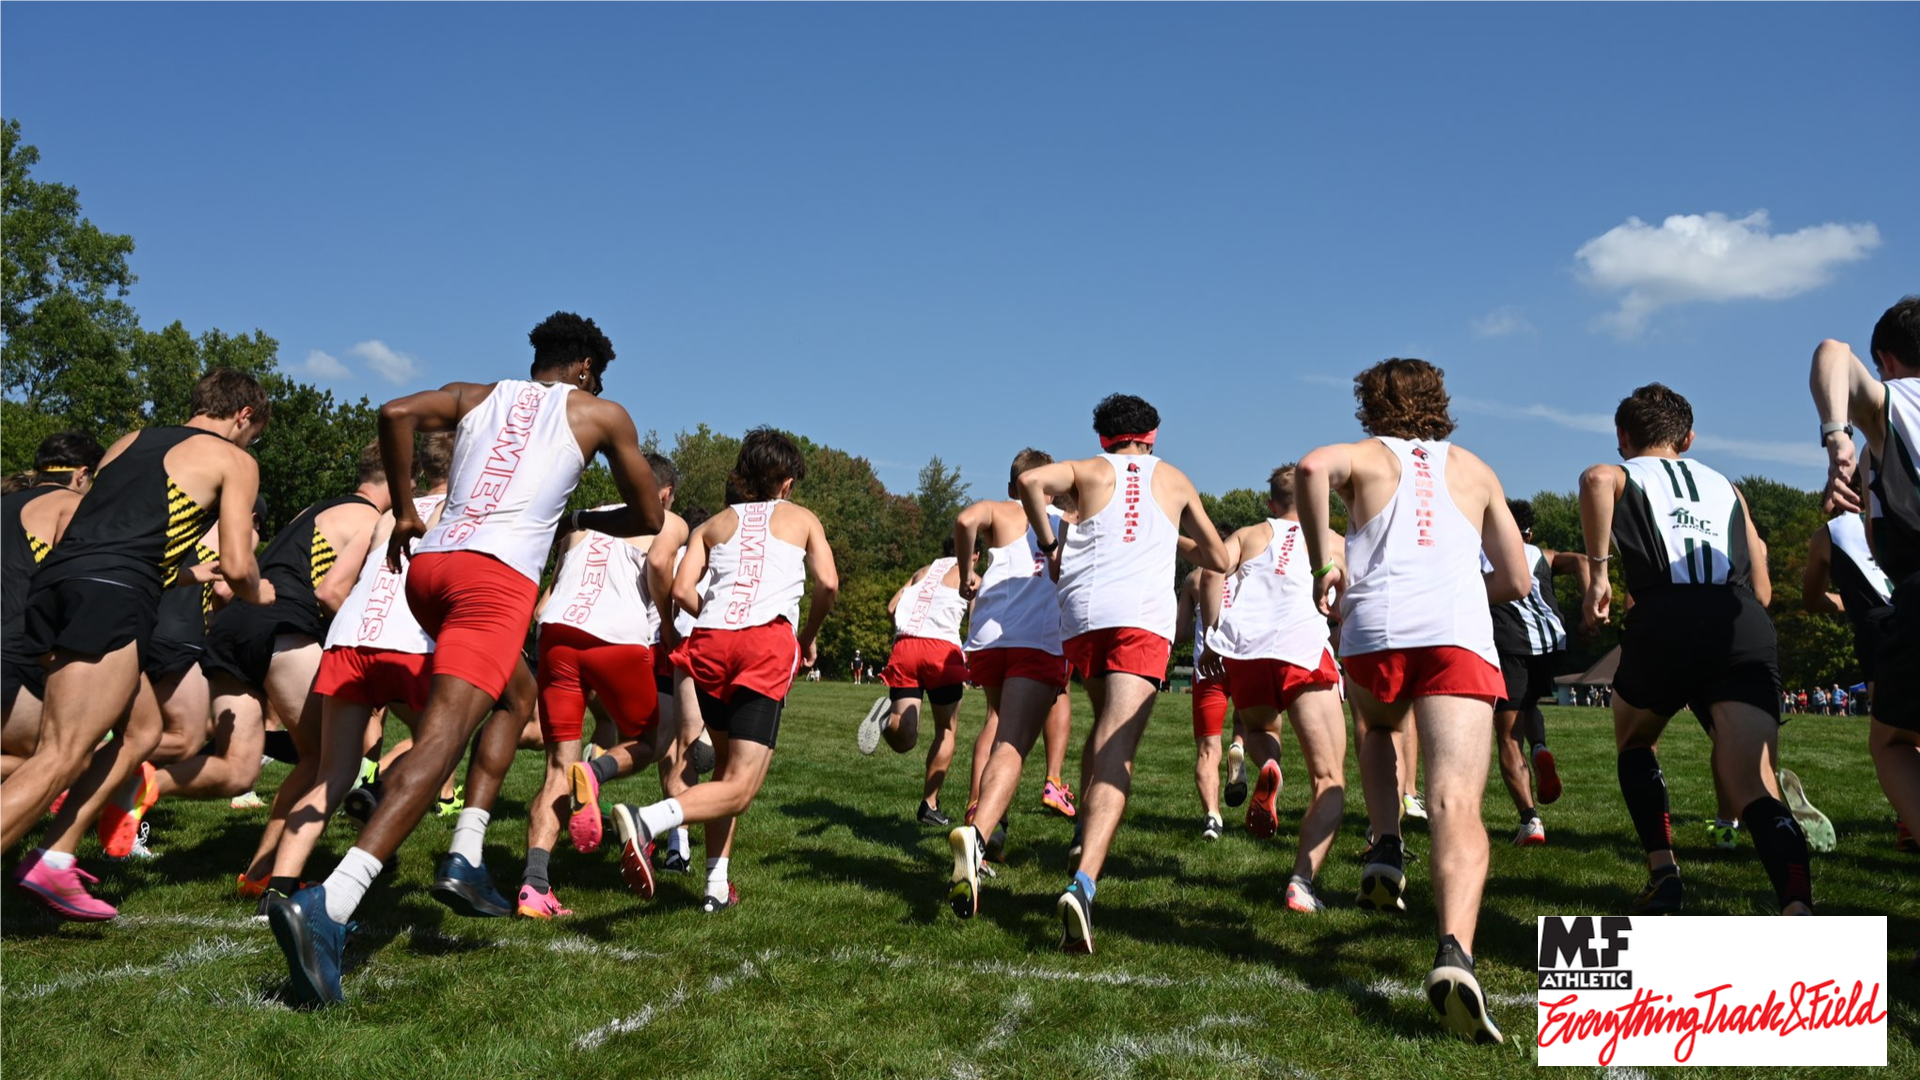 Men's Cross Country meets NCCAA Qualifying time at Lansing Community College meet